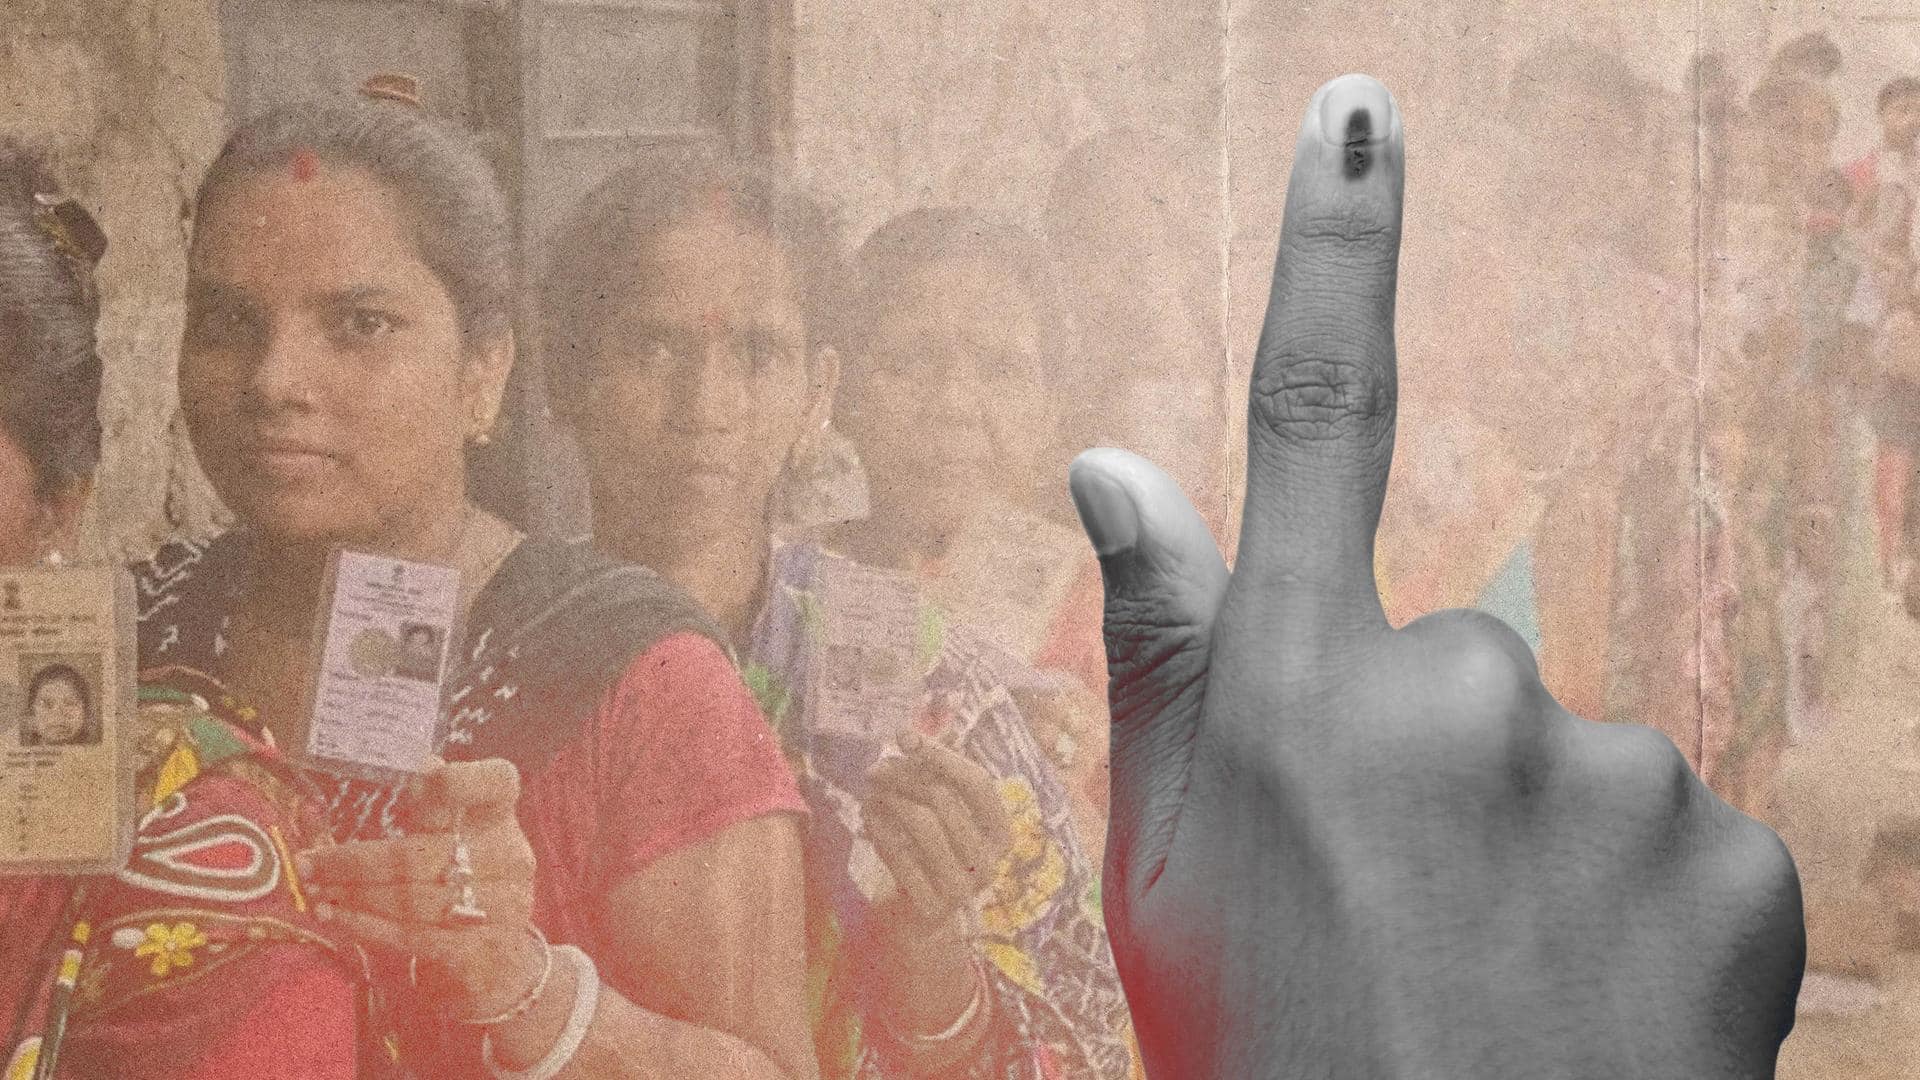 West Bengal panchayat elections: Counting begins amid tight security